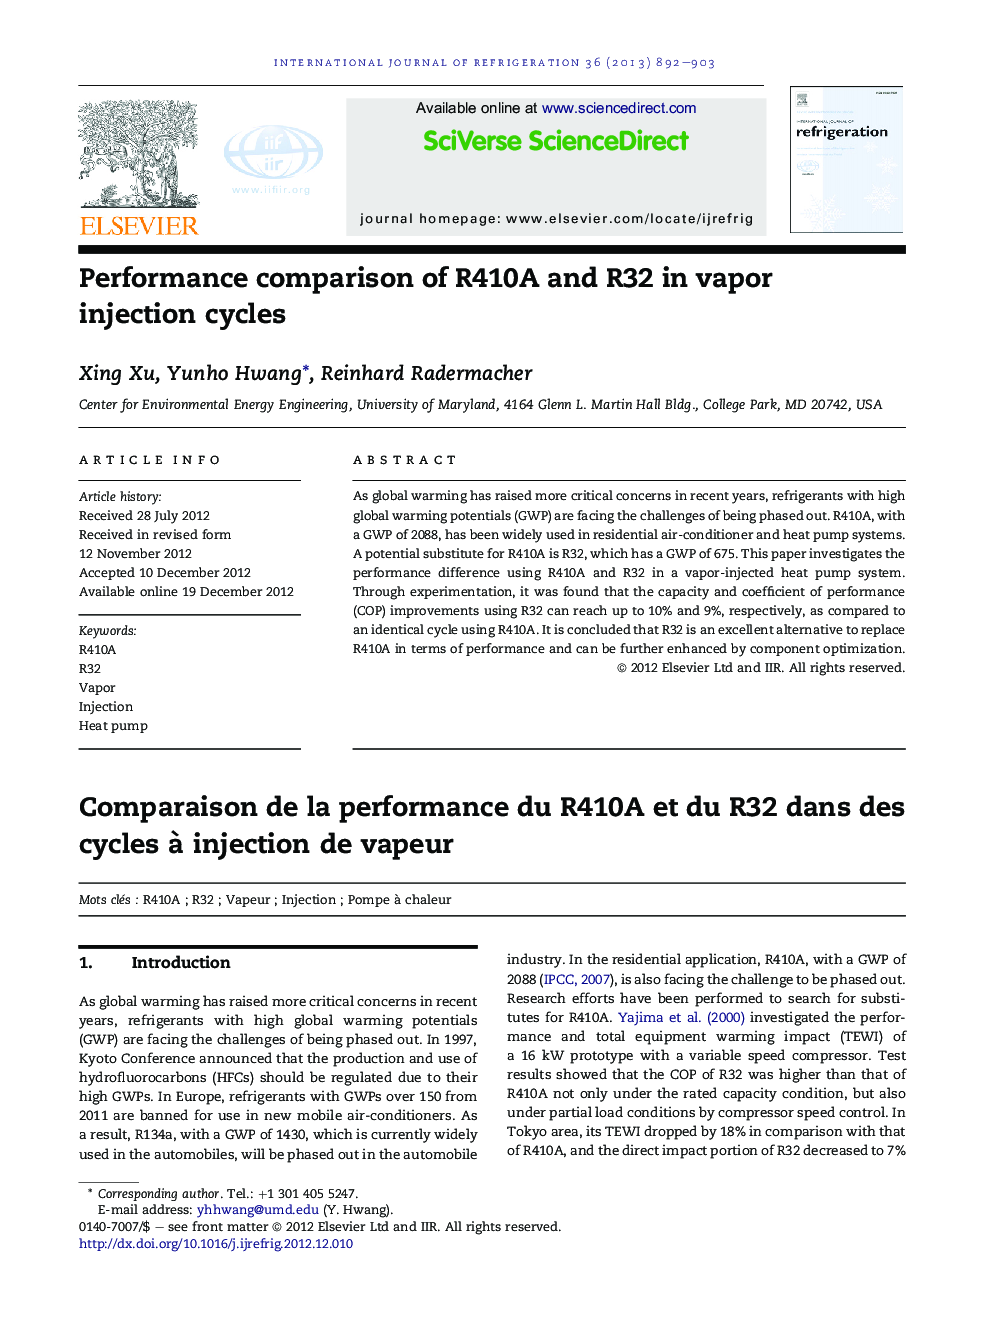 Performance comparison of R410A and R32 in vapor injection cycles